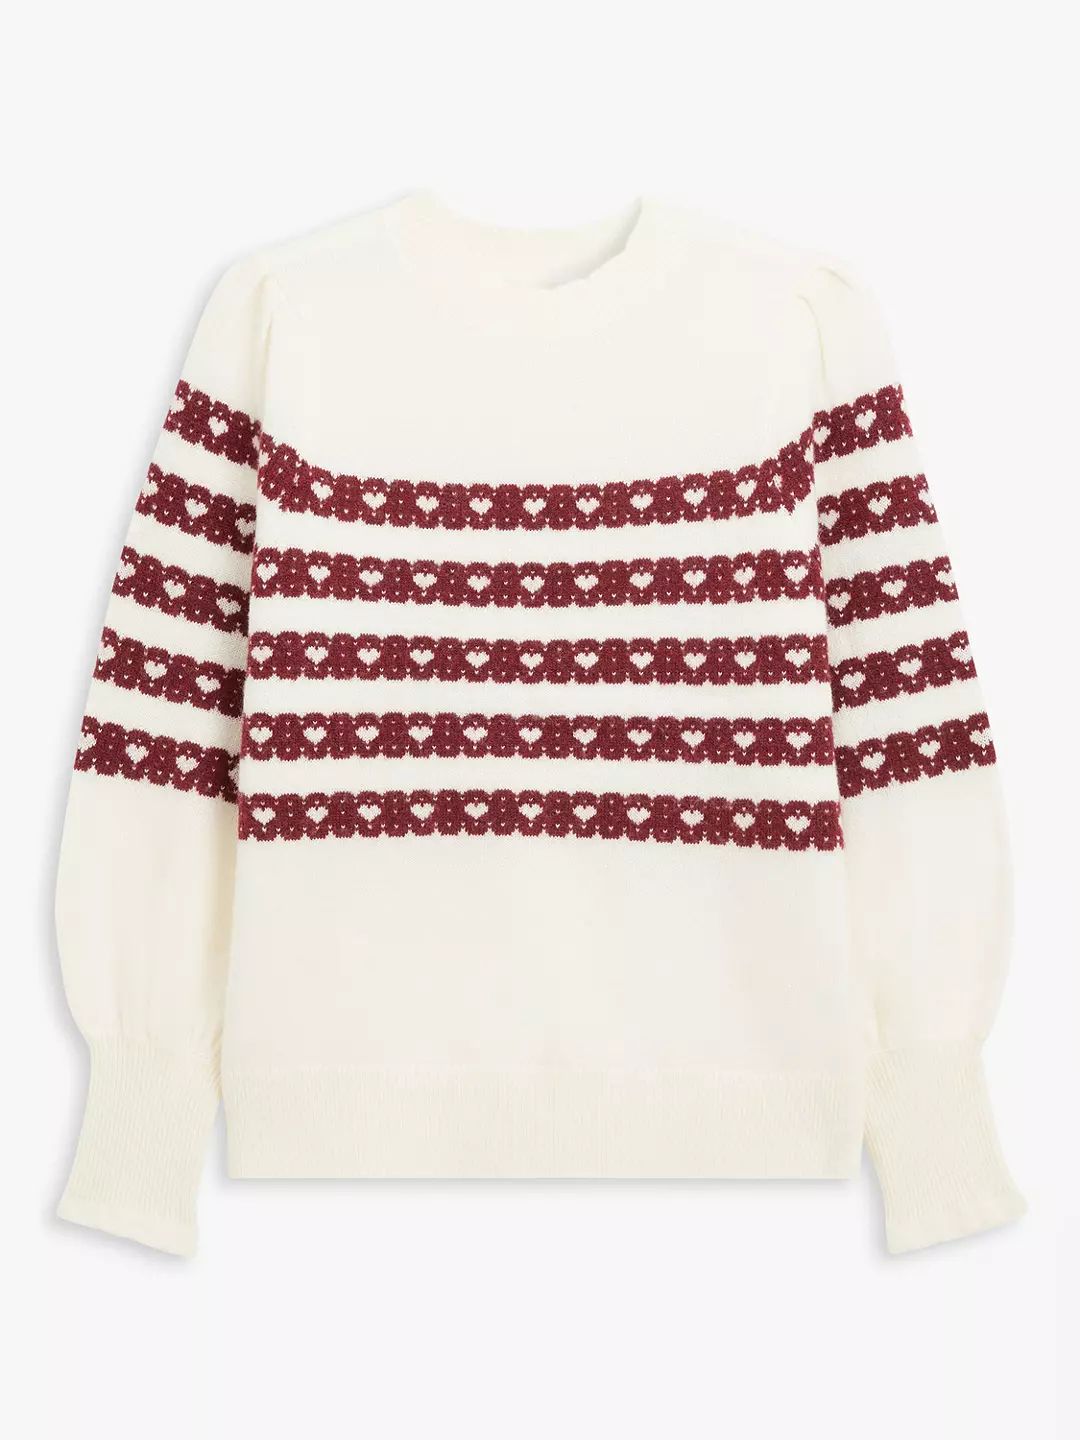 AND/OR Harley Heart Intarsia Knit Jumper, Cream/Red | John Lewis (UK)